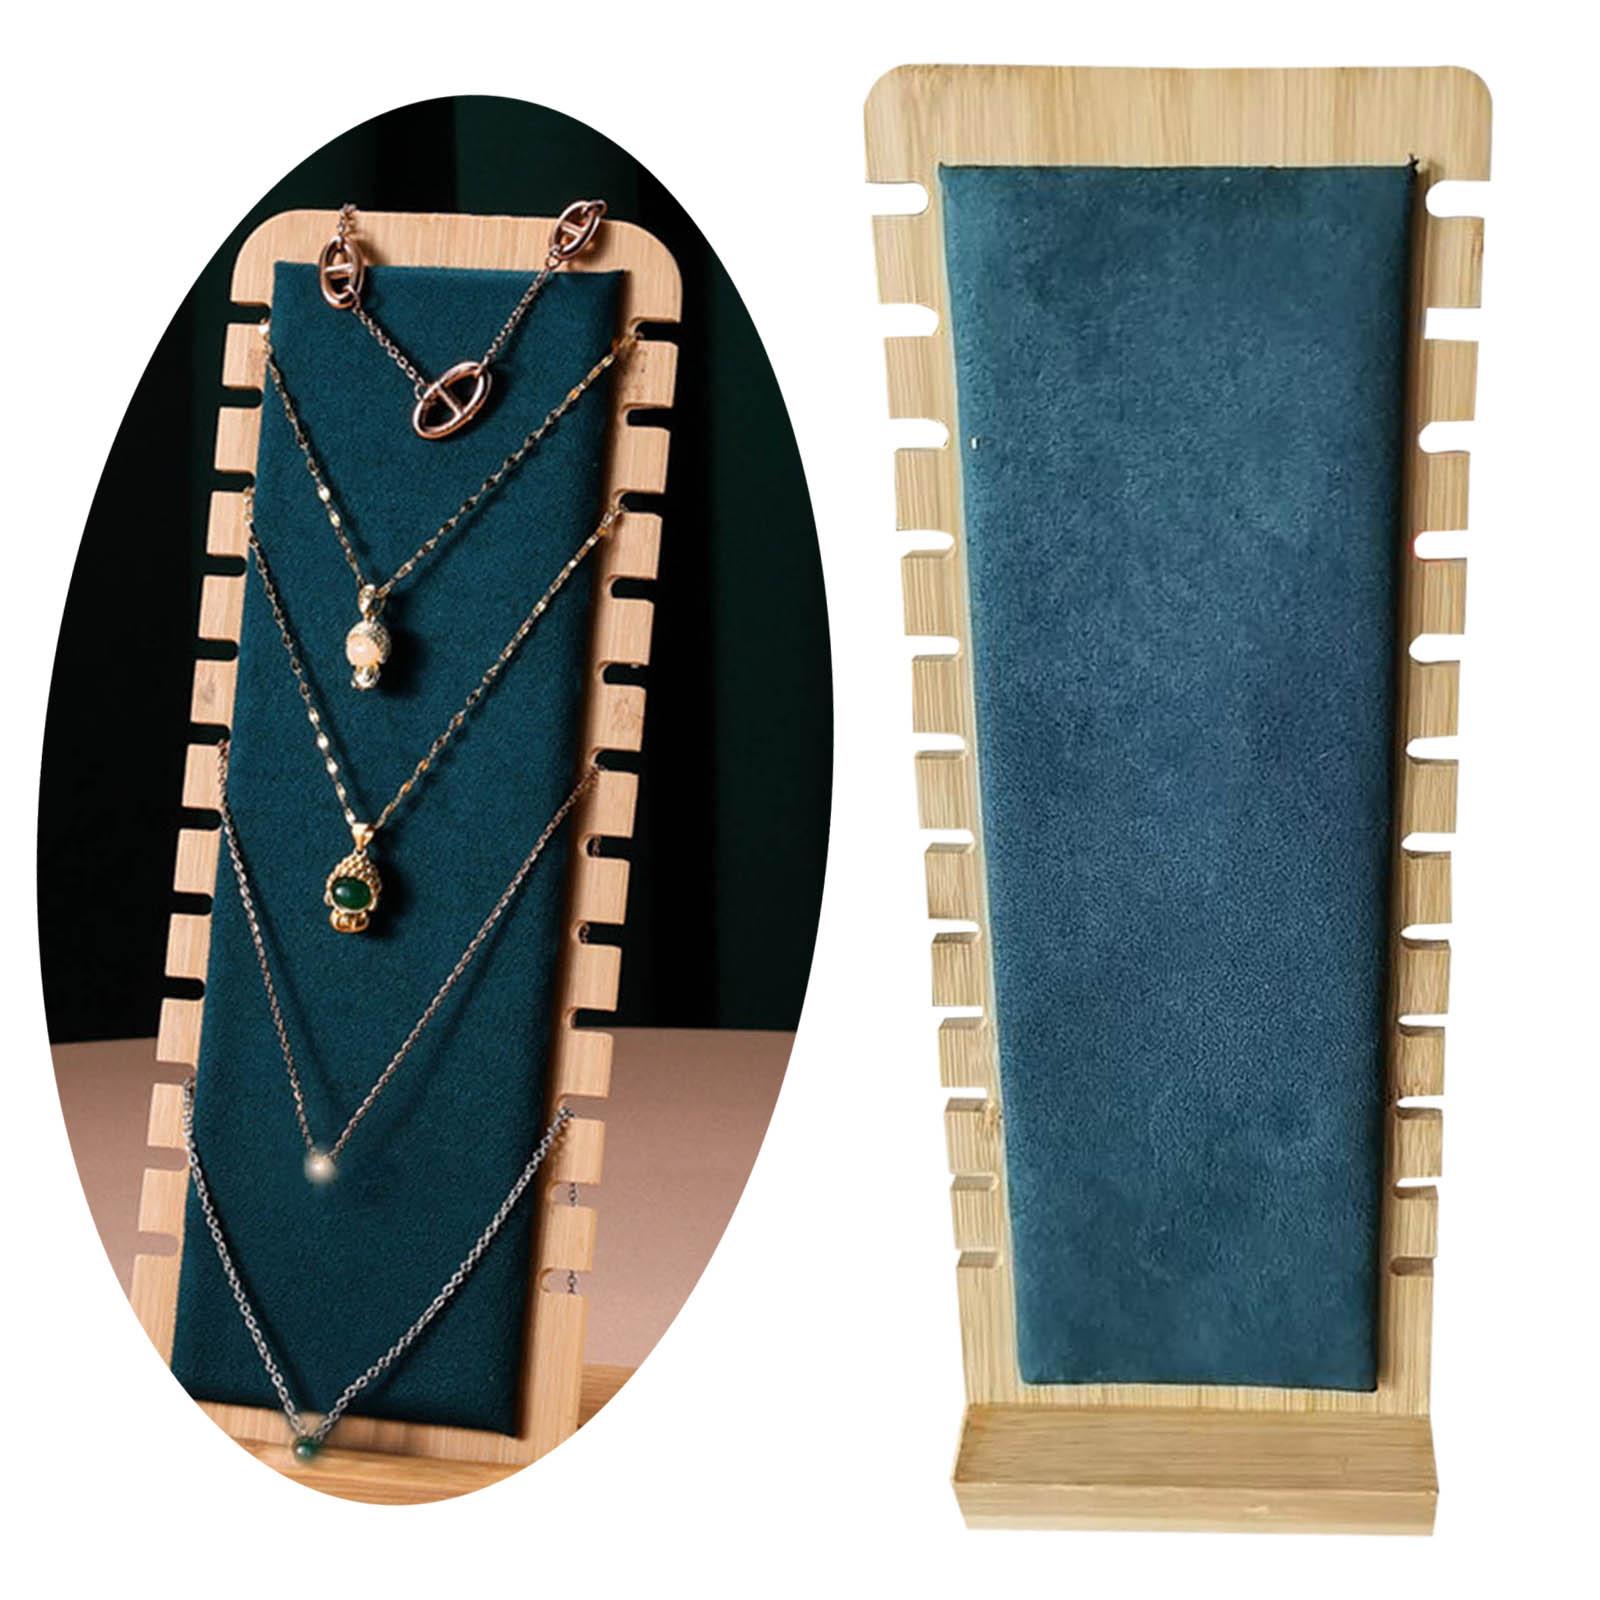 Wooden Plank Necklace Holder Display Board Jewelry Organizer Stand Showcase